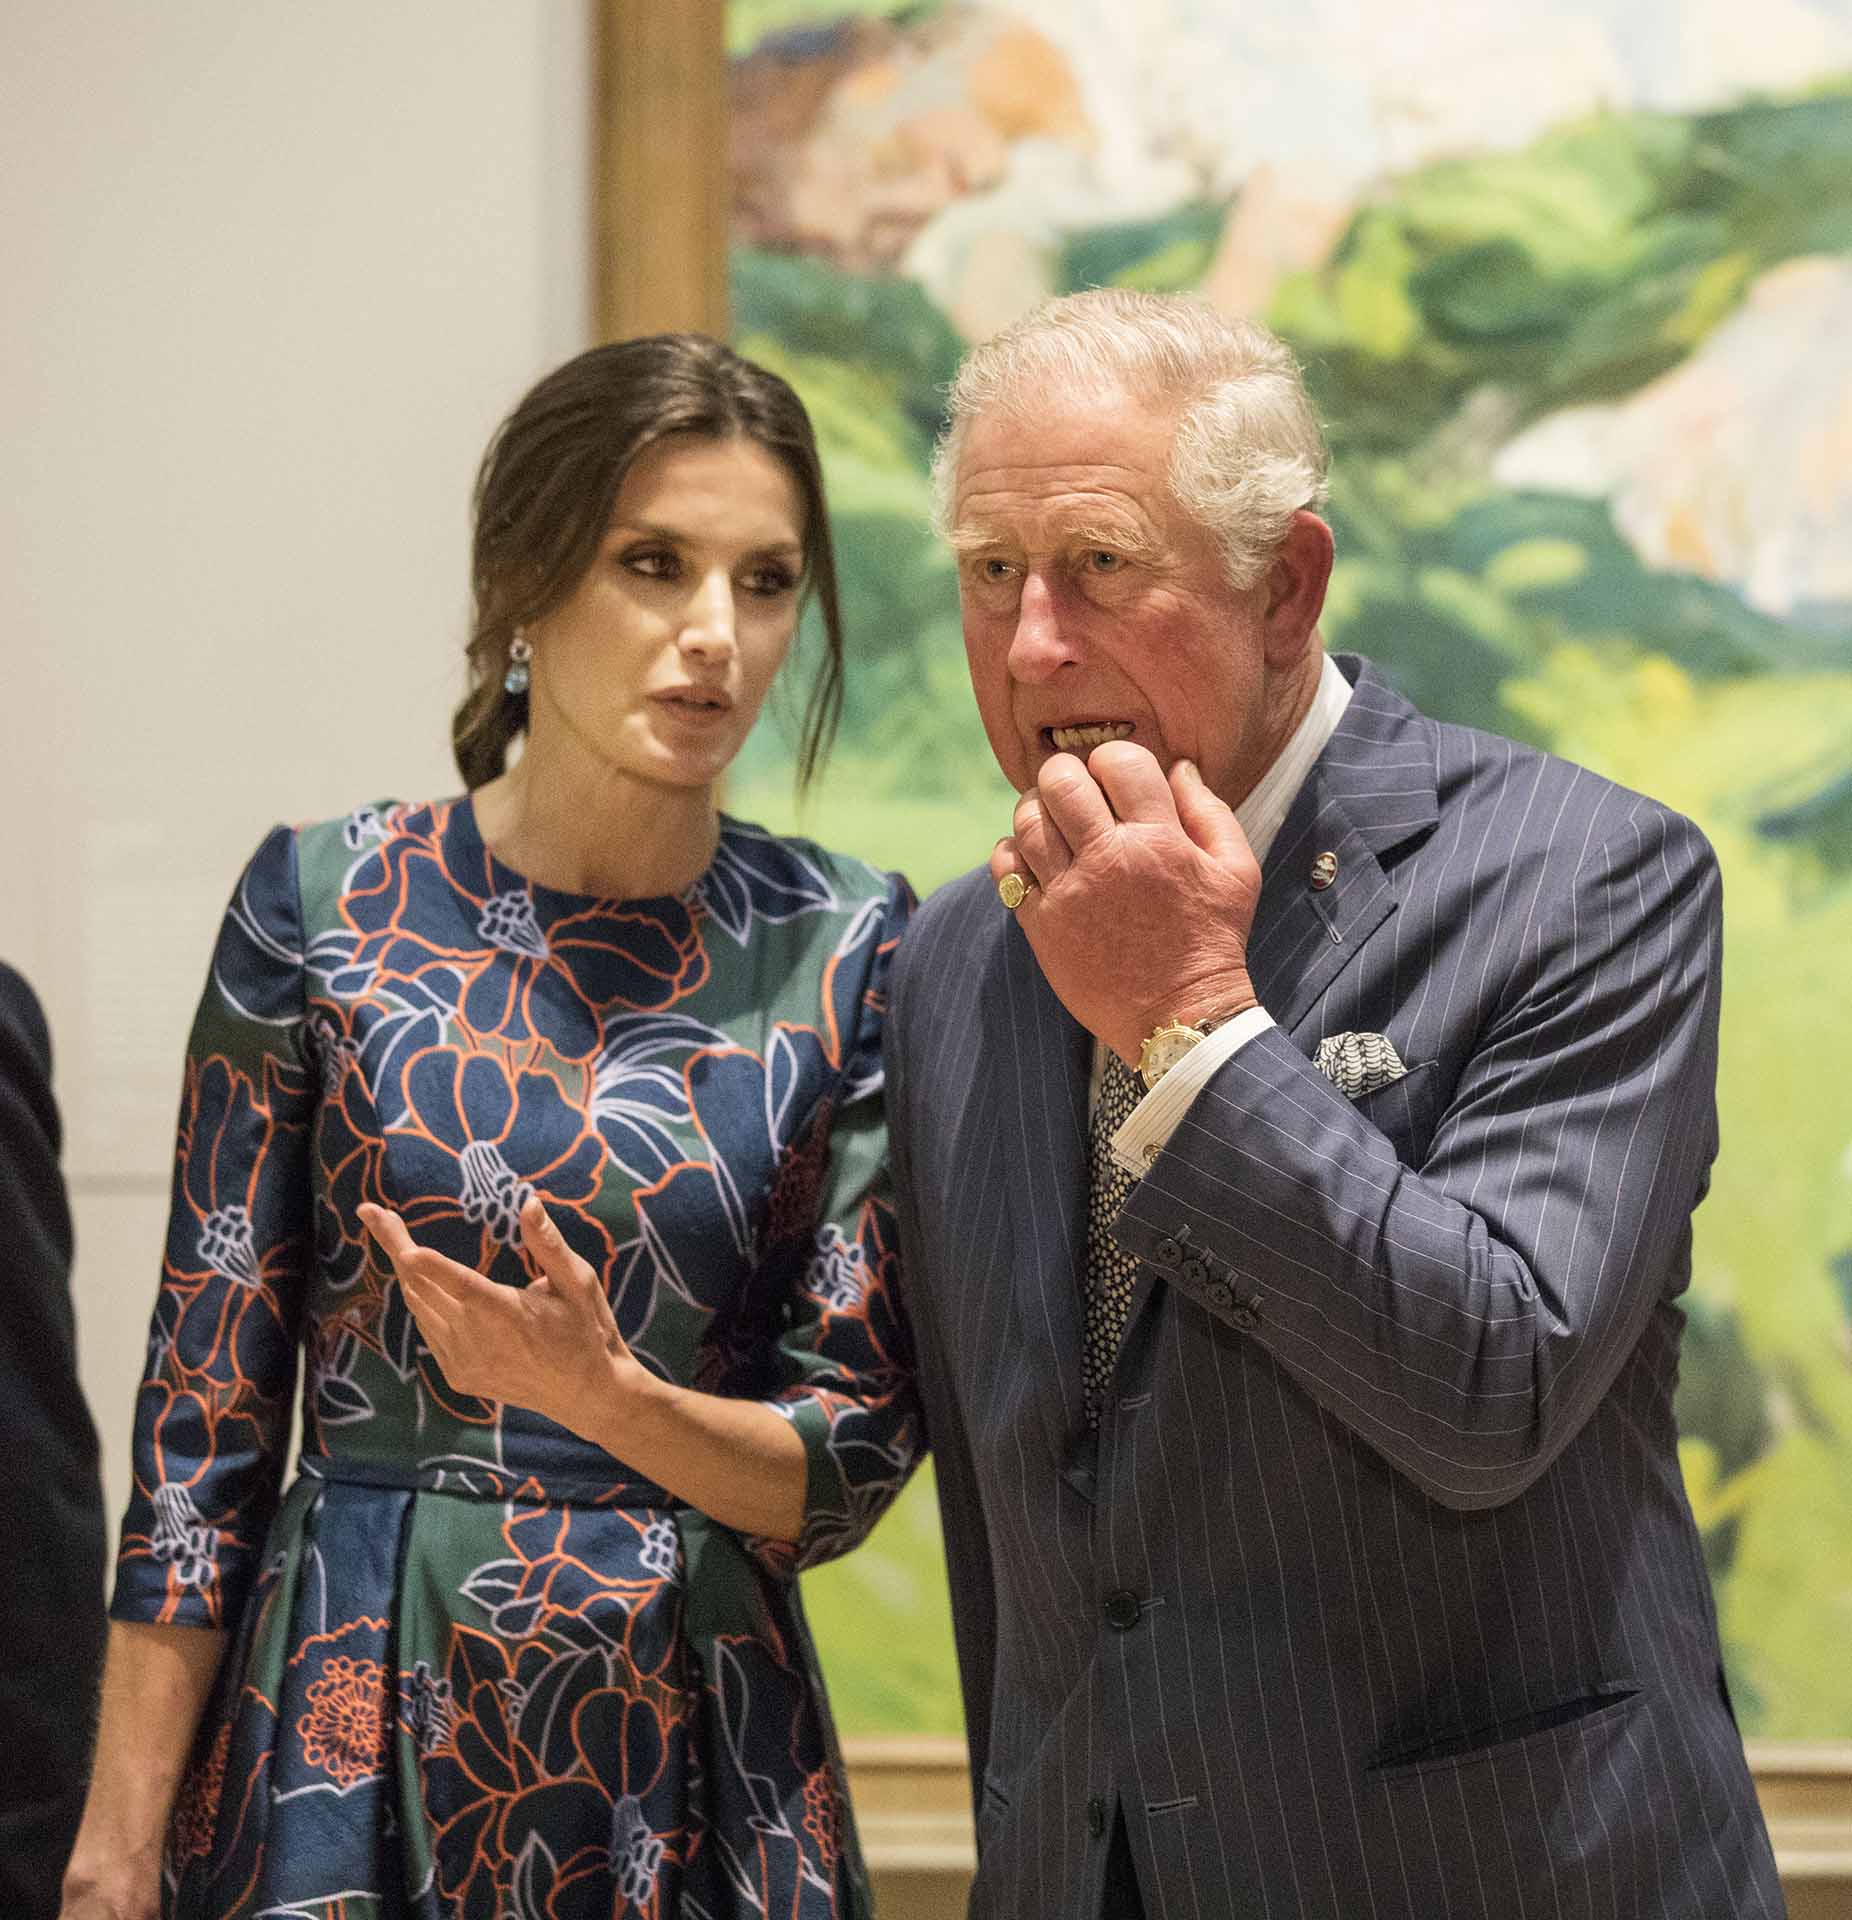 Britain’s Prince Charles and Queen Letizia of Spain visit the National Gallery, to attend the opening of the exhibition «Sorolla: Spanish Master of Light» in  London, Wednesday March 13, 2019